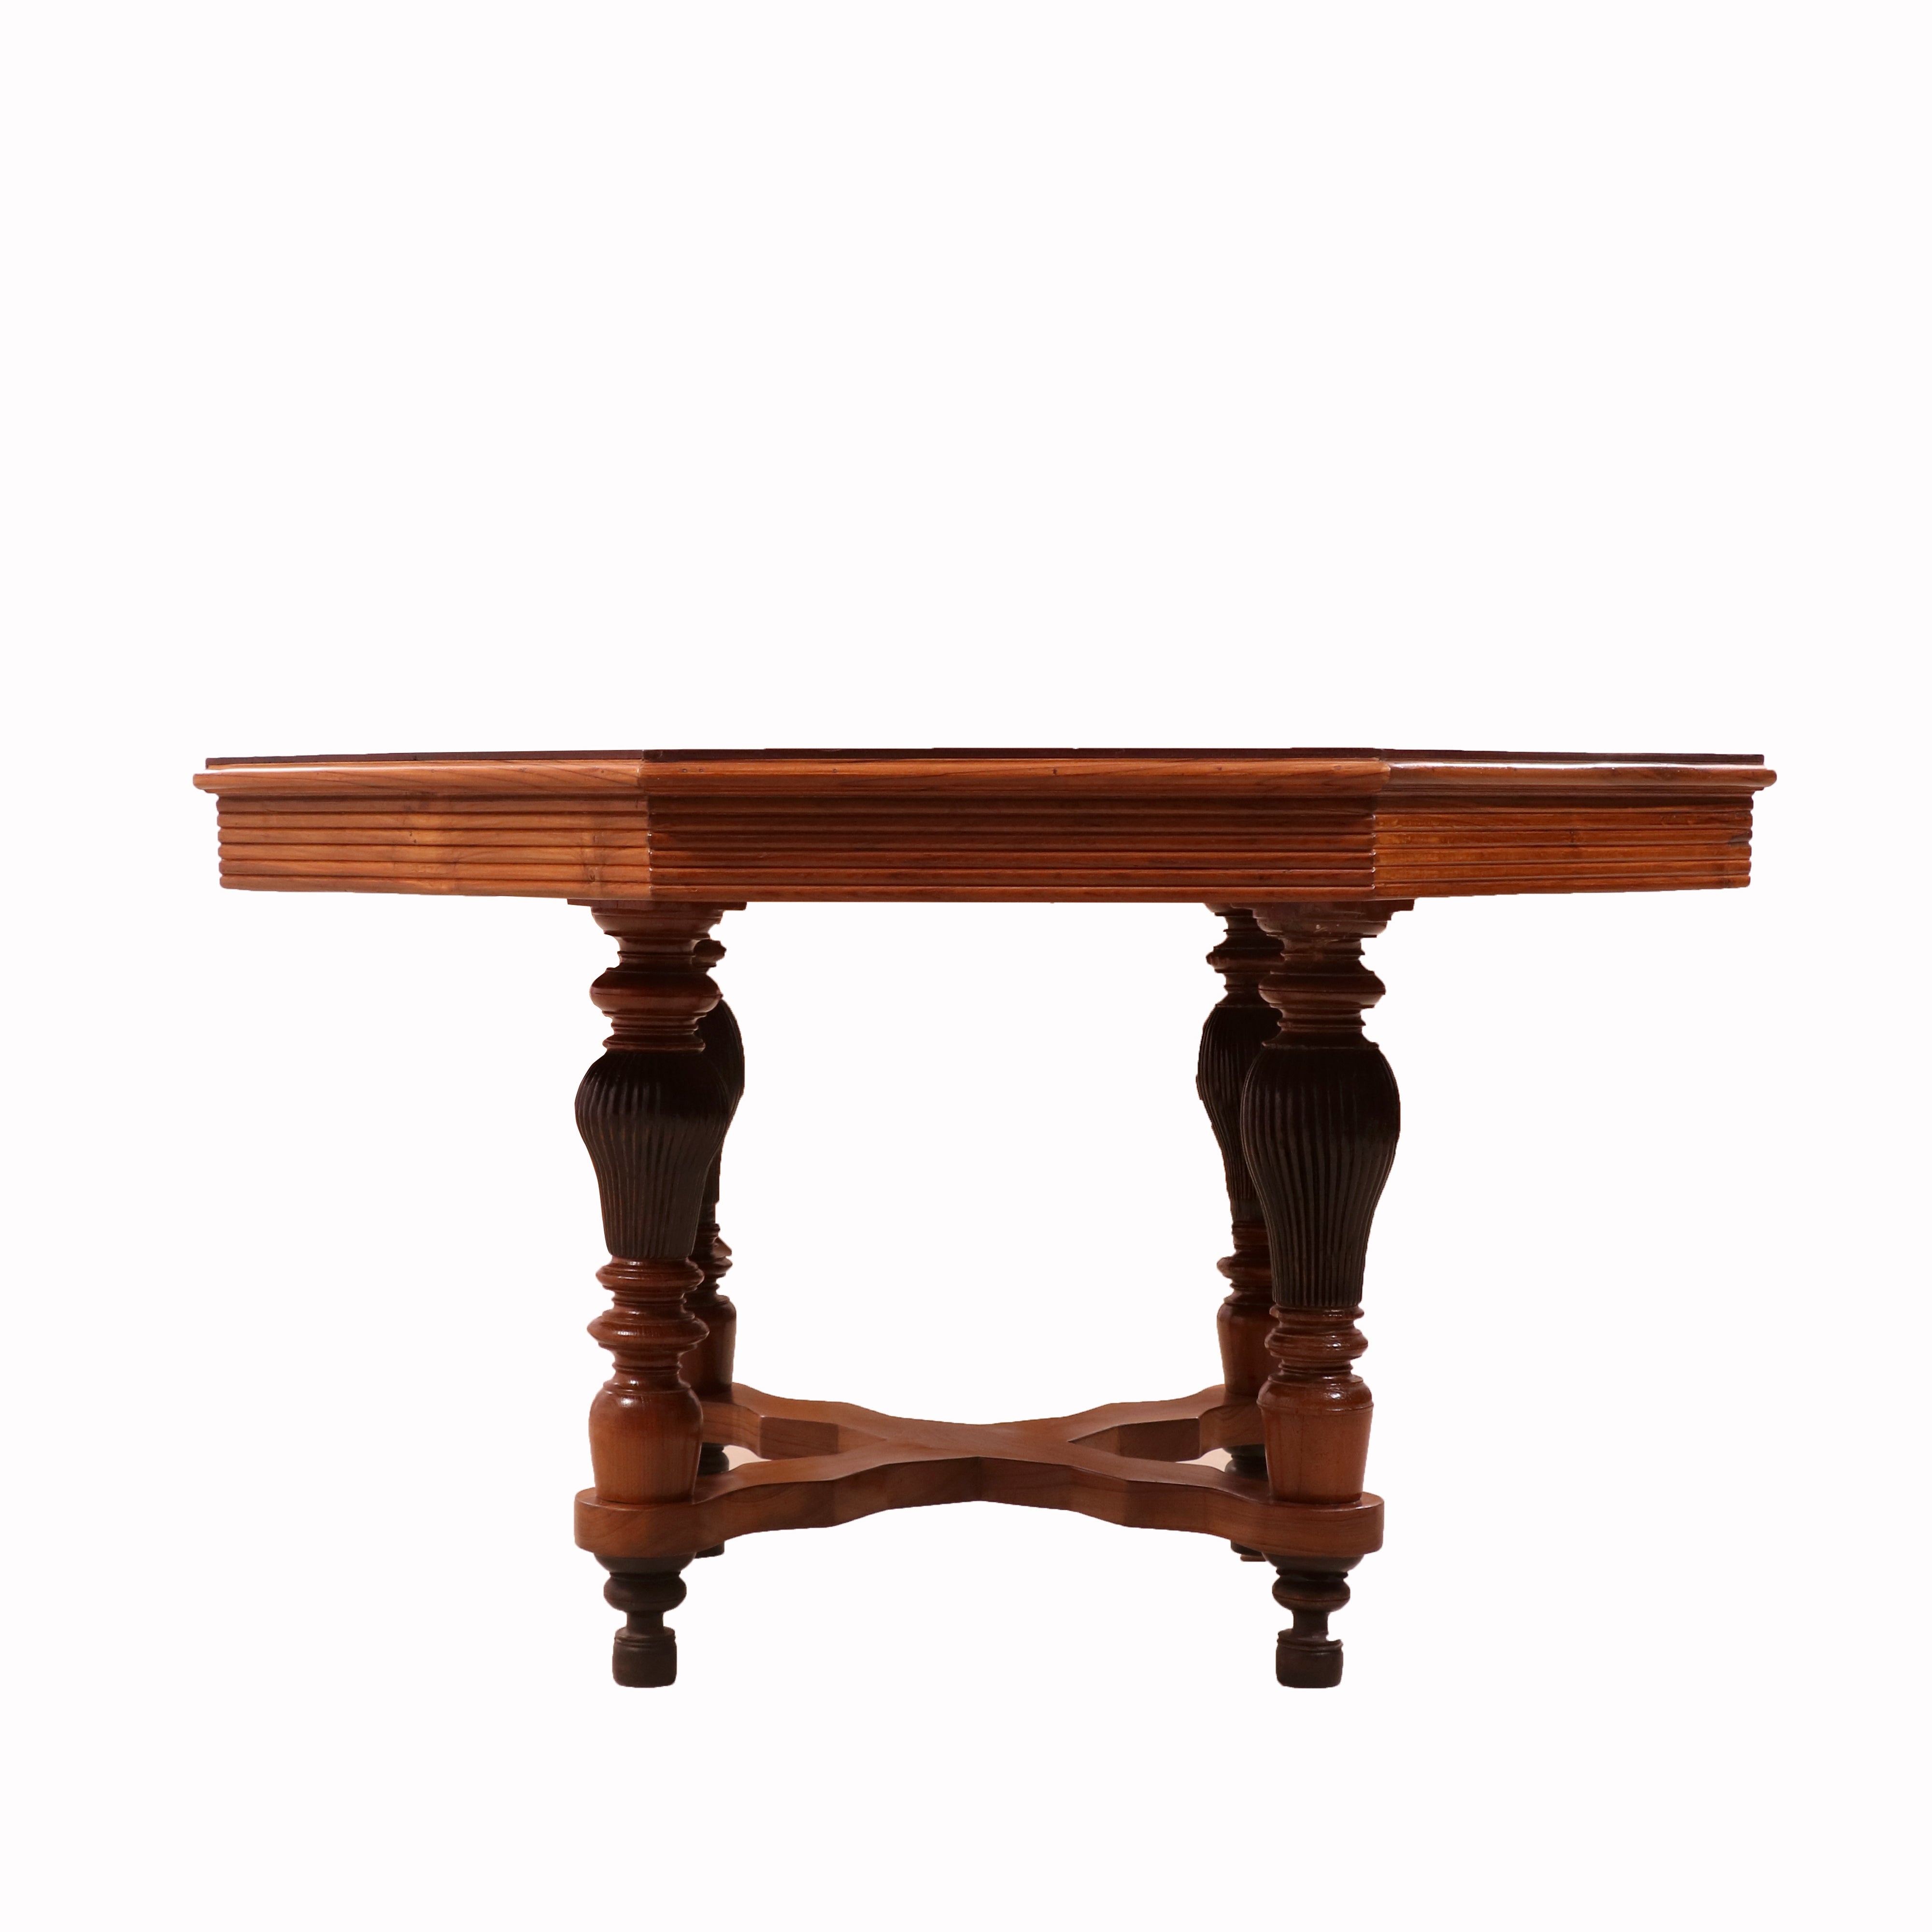 Octagonal Solid Teak Wood Dining Table Dining Table